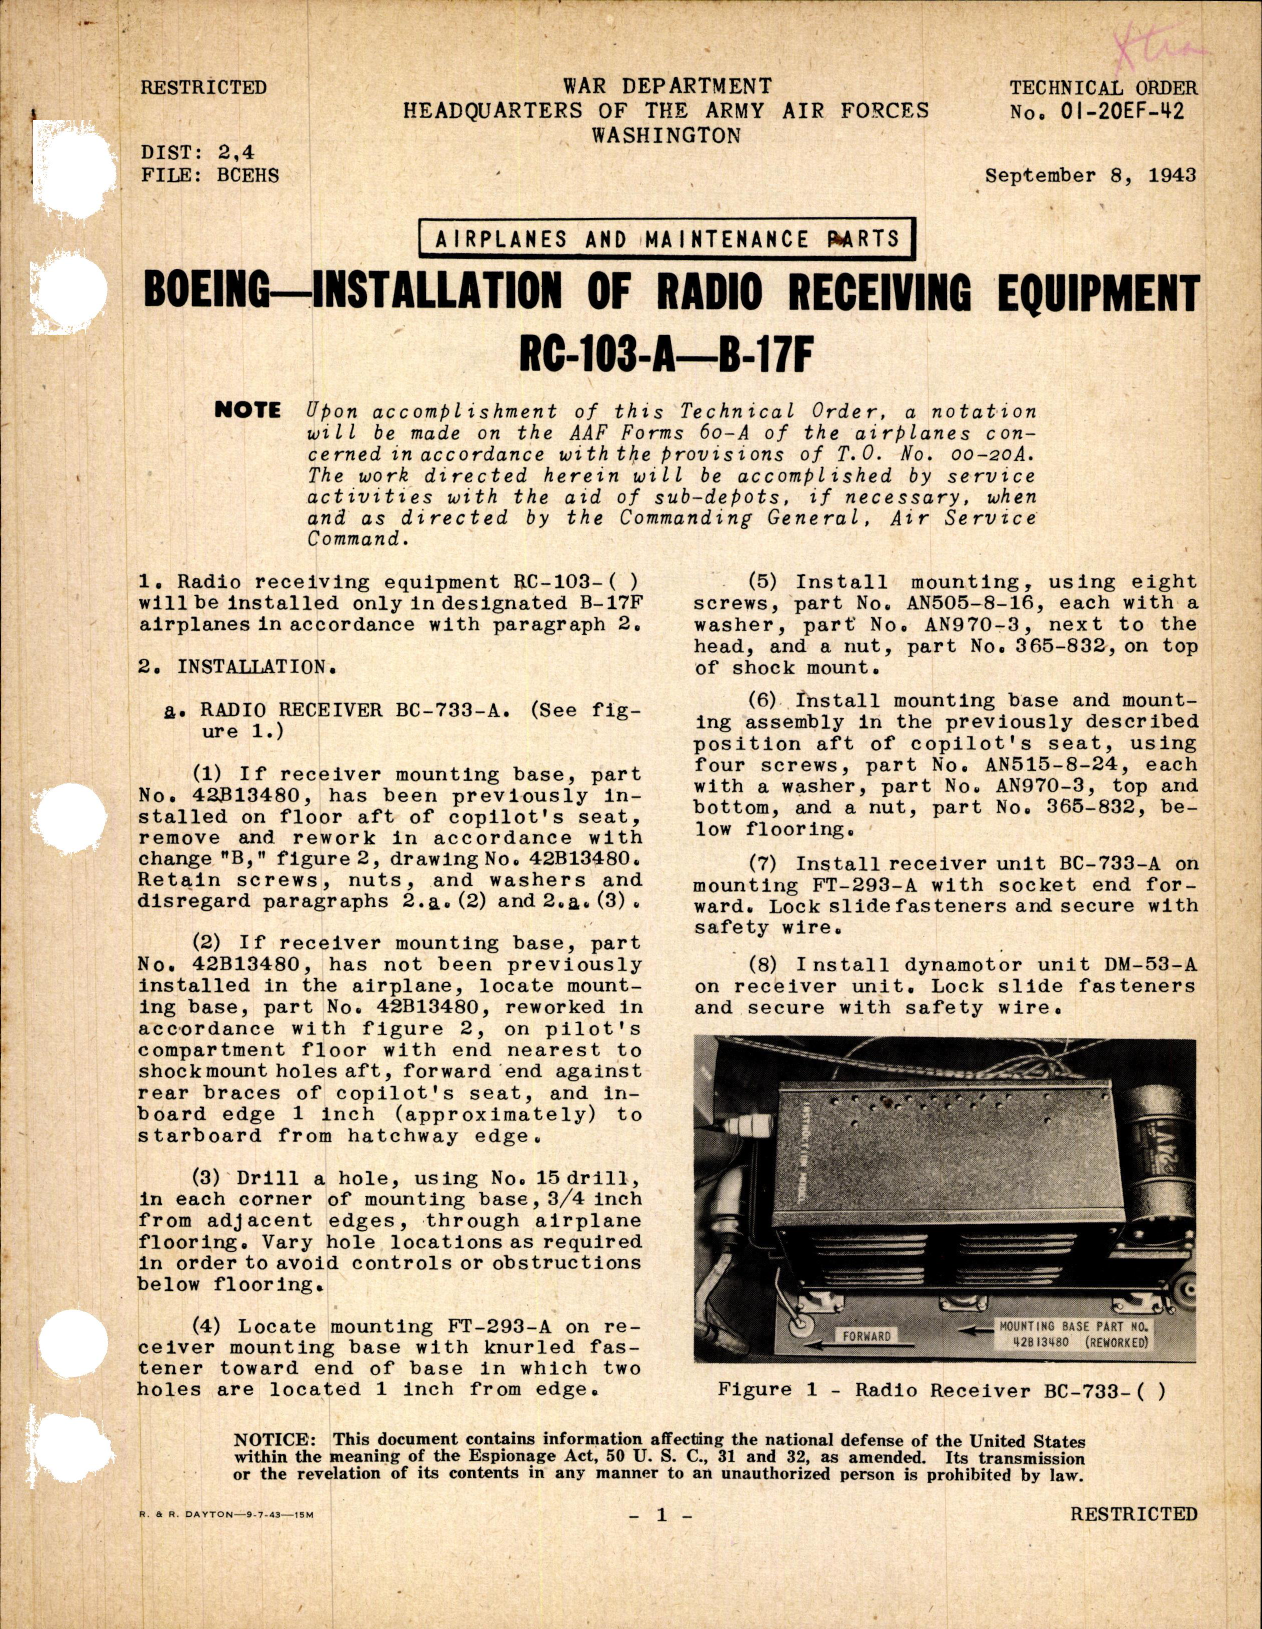 Sample page 1 from AirCorps Library document: Installation of Radio Receiving Equipment RC-103-A for B-17F